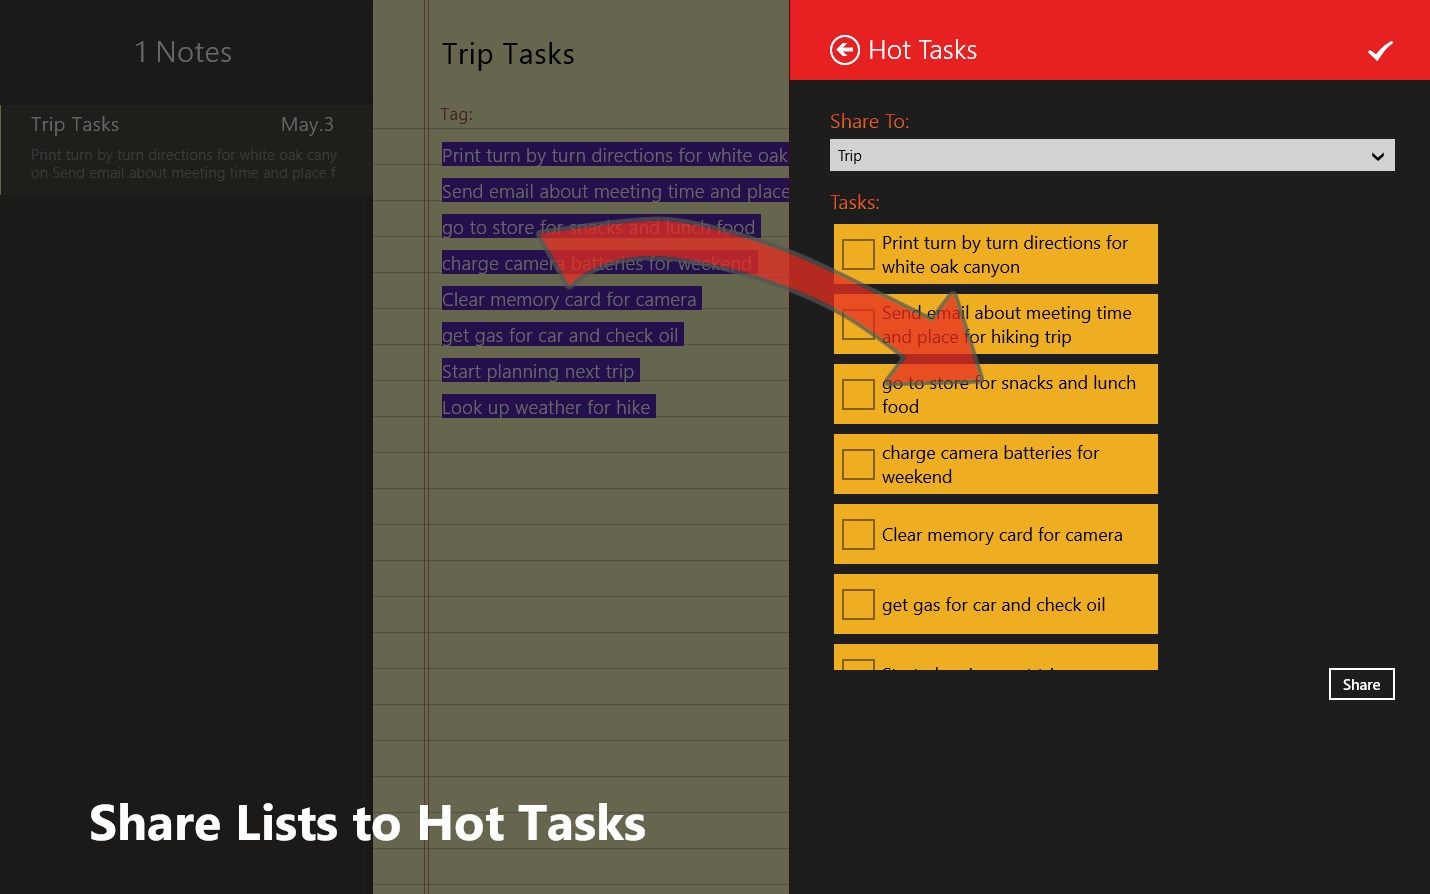 Share Lists to Hot Tasks